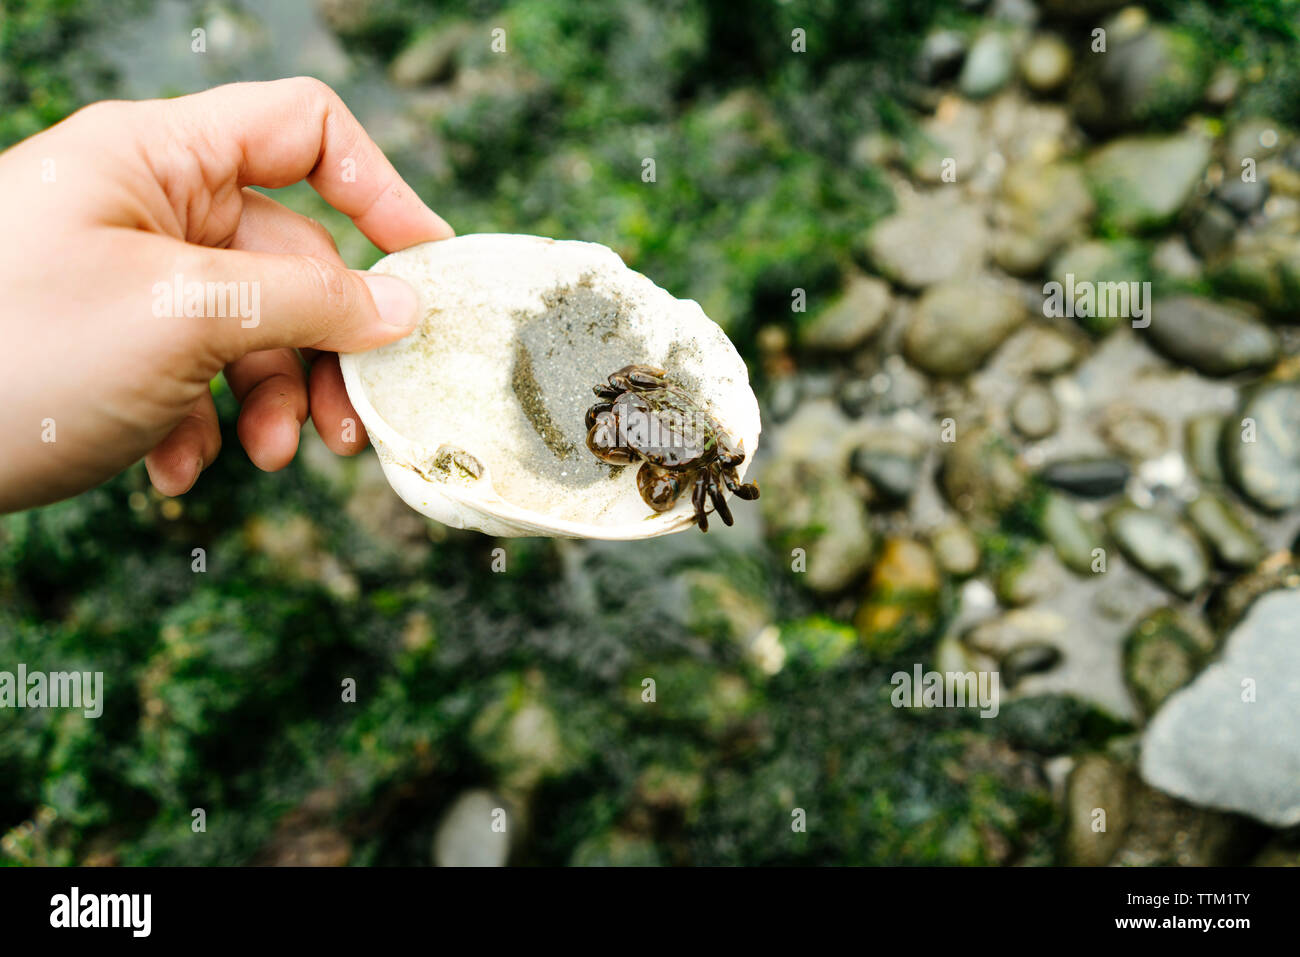 Cropped hand of man holding seashell avec crabe beach Banque D'Images